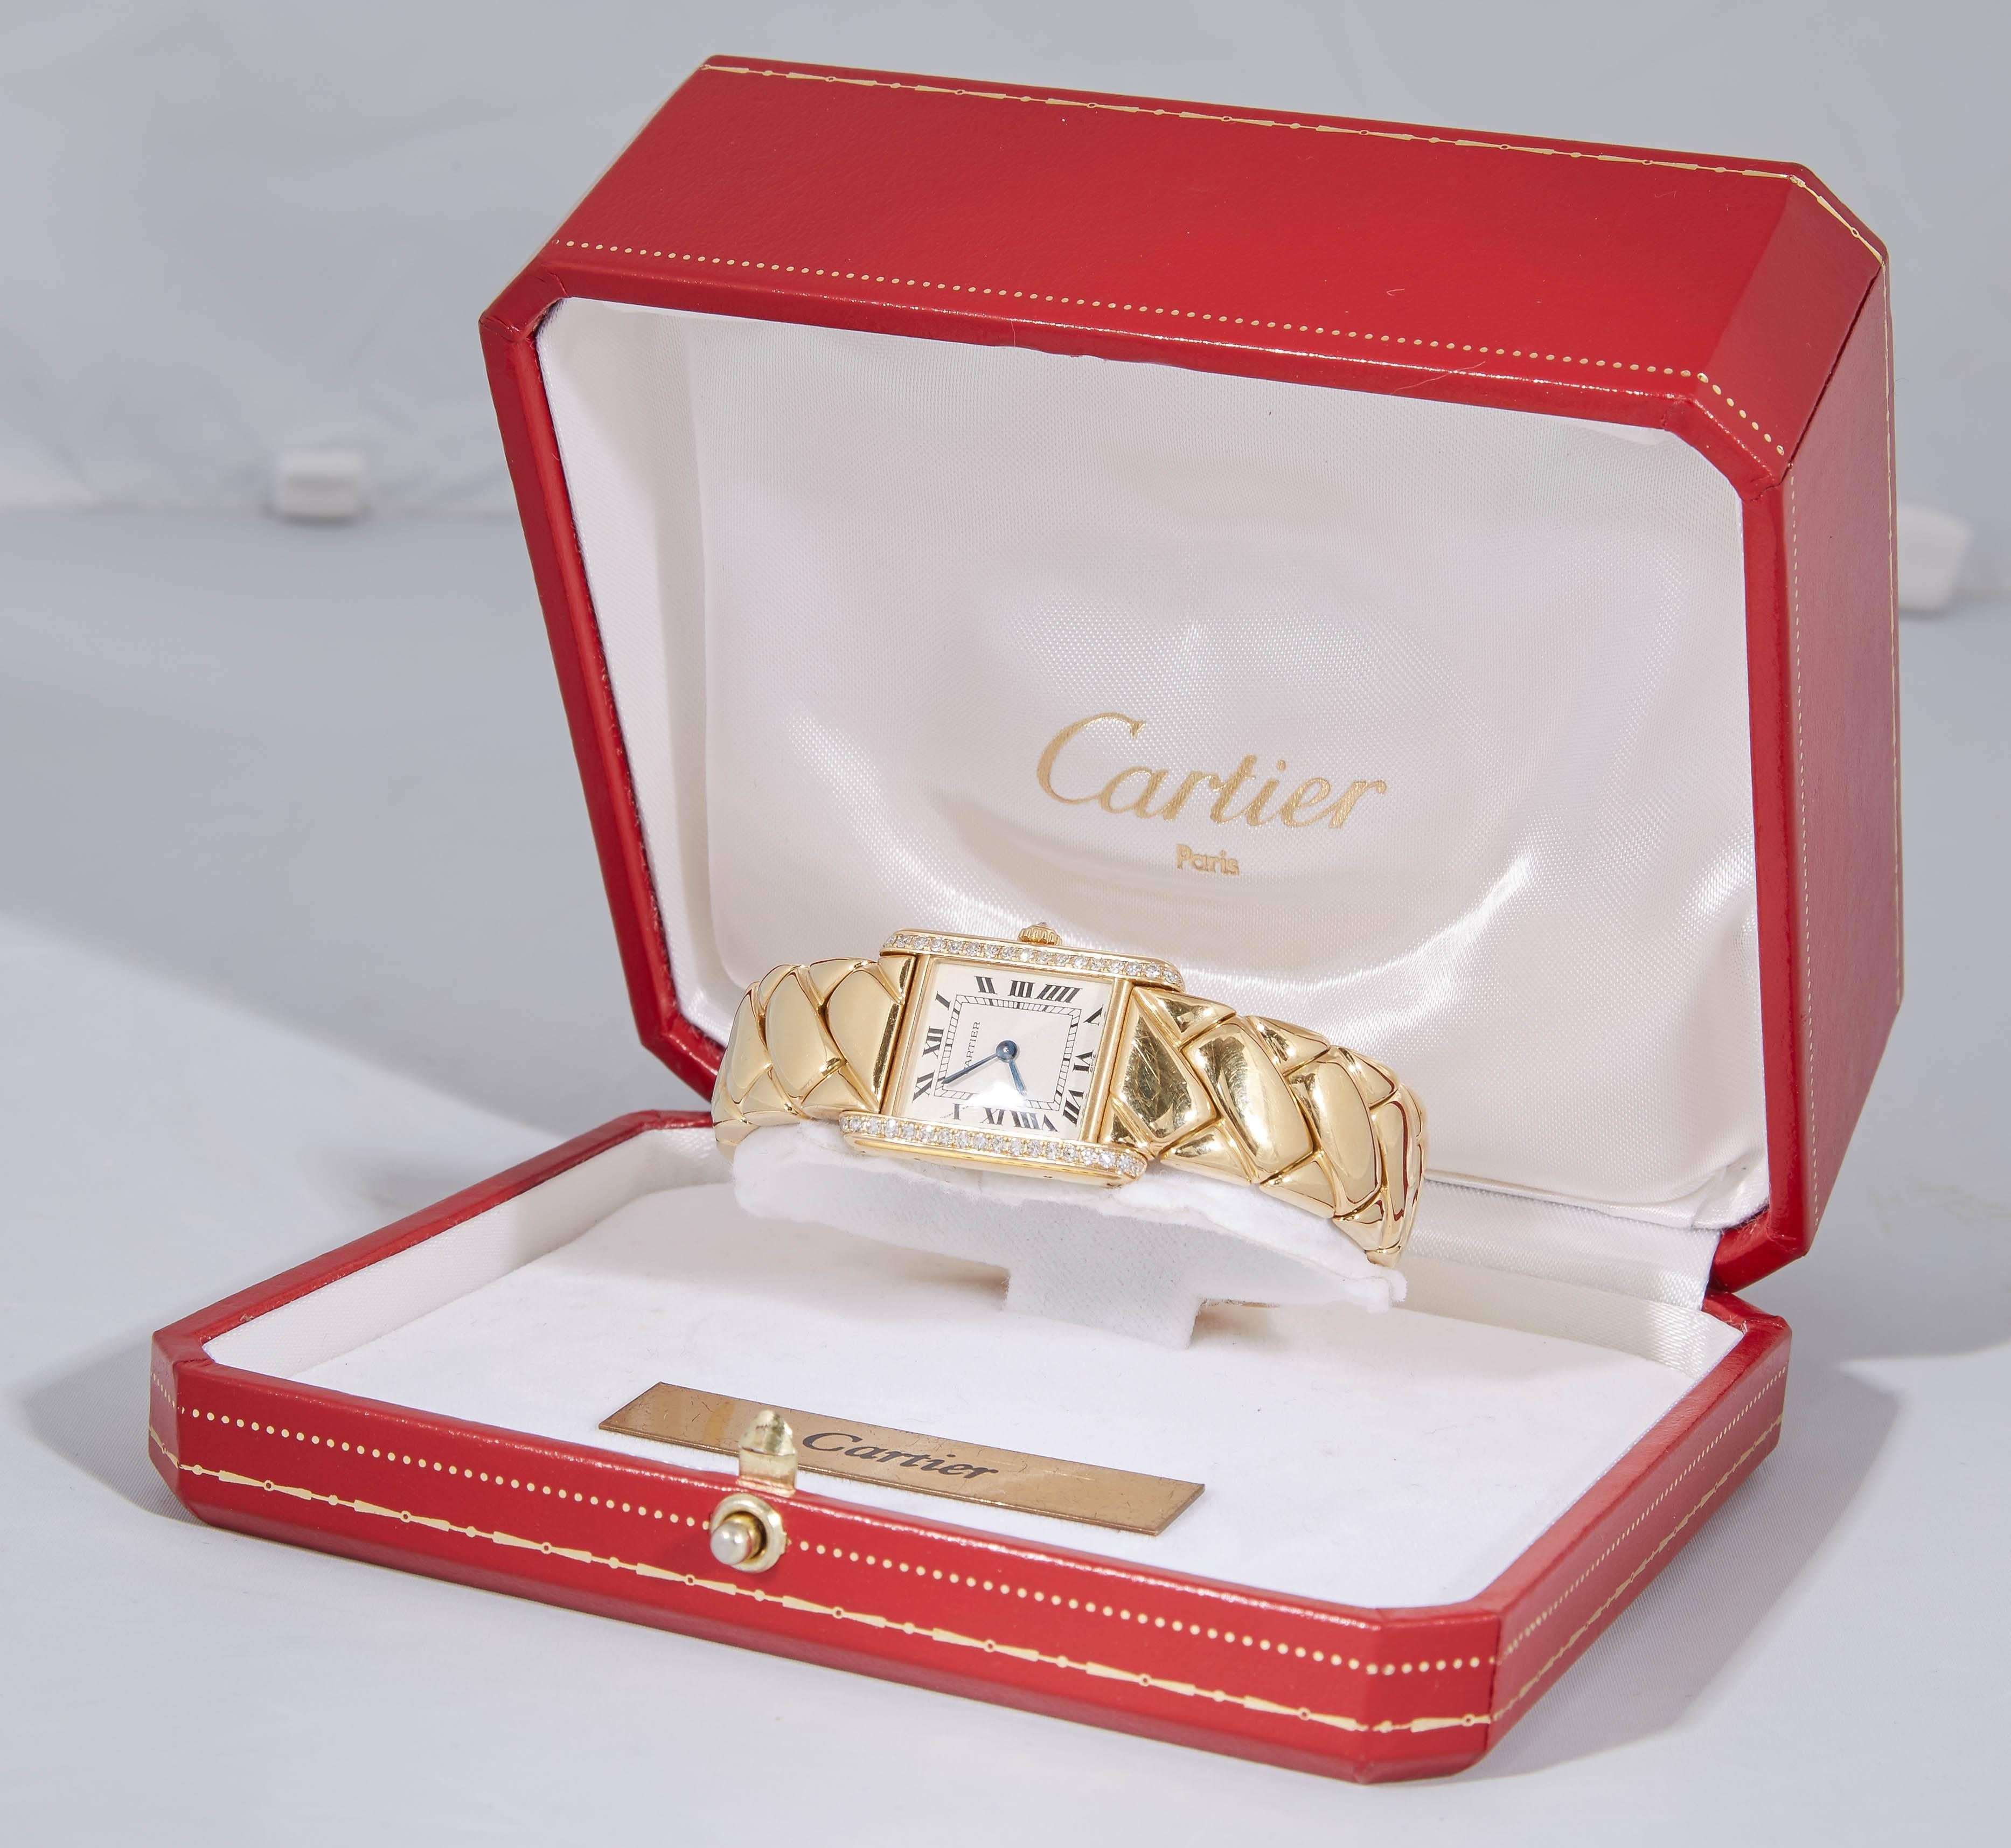 One Ladies Quilt/Woven Pattern Design Watch Designed By Cartier Paris Embellished With Numerous Full Cut Diamonds Weighing Approximately .50ct Total Weight. Made In 18kt Yellow Gold With A Deployant Clasp And Quartz Movement.